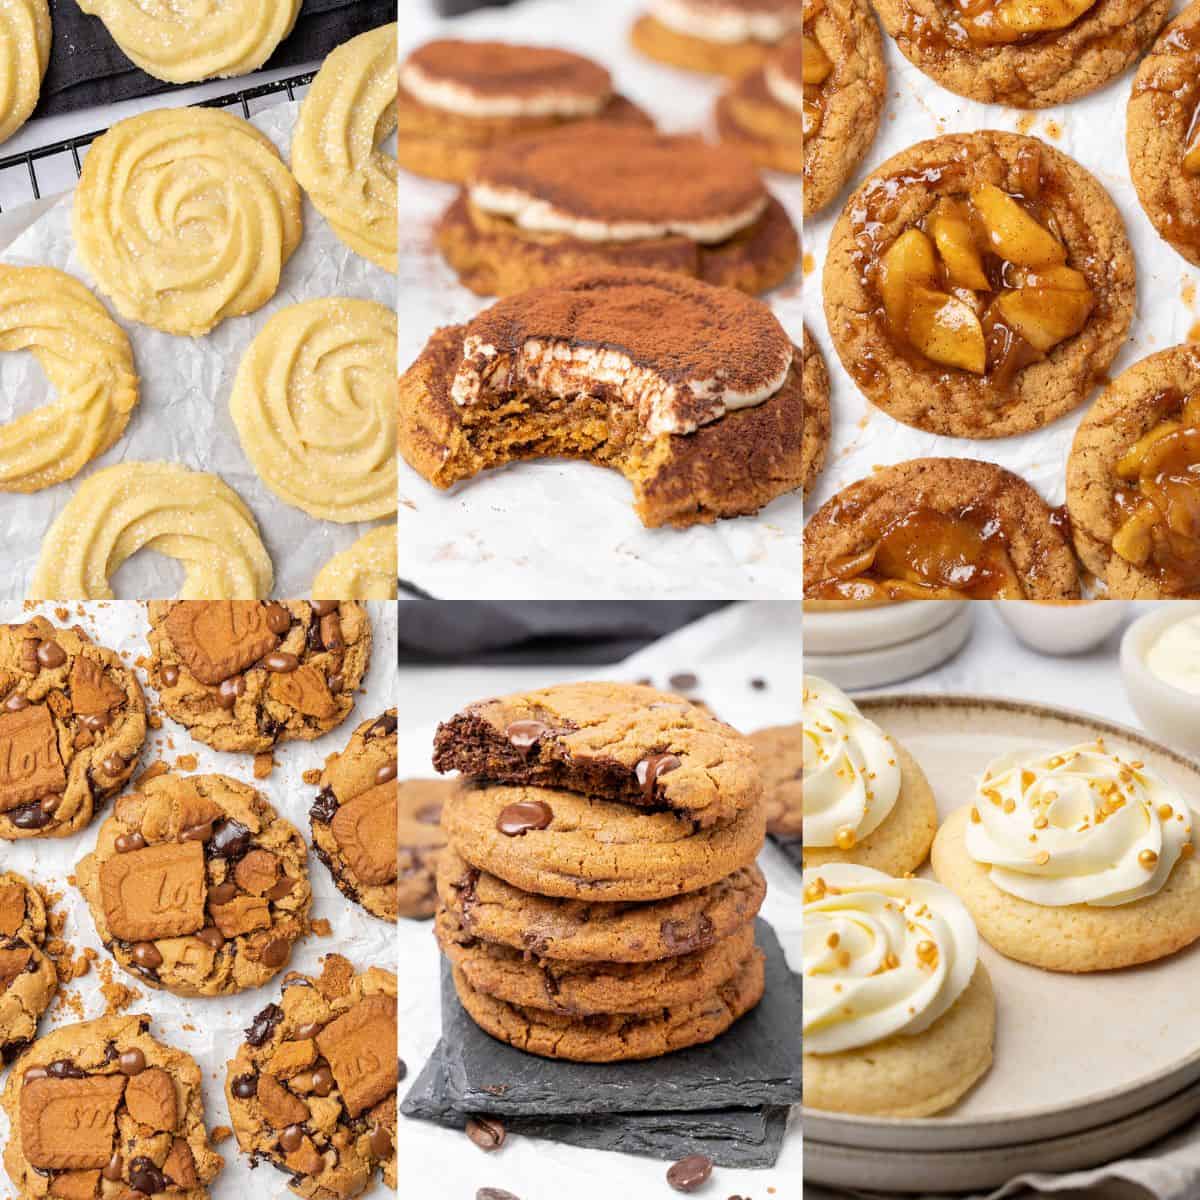 <p>What makes cookie recipes fun and unique? Certainly, unusual ingredients, fun colors, shapes, and flavor combinations all play a part in the most creative cookies. Here is my list of <strong><a href="https://www.spatuladesserts.com/fun-unique-cookie-recipes/">fun & unique cookie recipes</a></strong> to make at home for when a cookie craving hits but you want something a bit different!</p><p><strong>Go to the recipes: <a href="https://www.spatuladesserts.com/fun-unique-cookie-recipes/">Unique Cookie Recipes</a></strong></p><p><strong>This article originally was published as <a href="https://www.spatuladesserts.com/puff-pastry-desserts/">Best Puff Pastry Desserts</a> at <a href="https://www.spatuladesserts.com/">Spatula Desserts</a>.</strong></p>